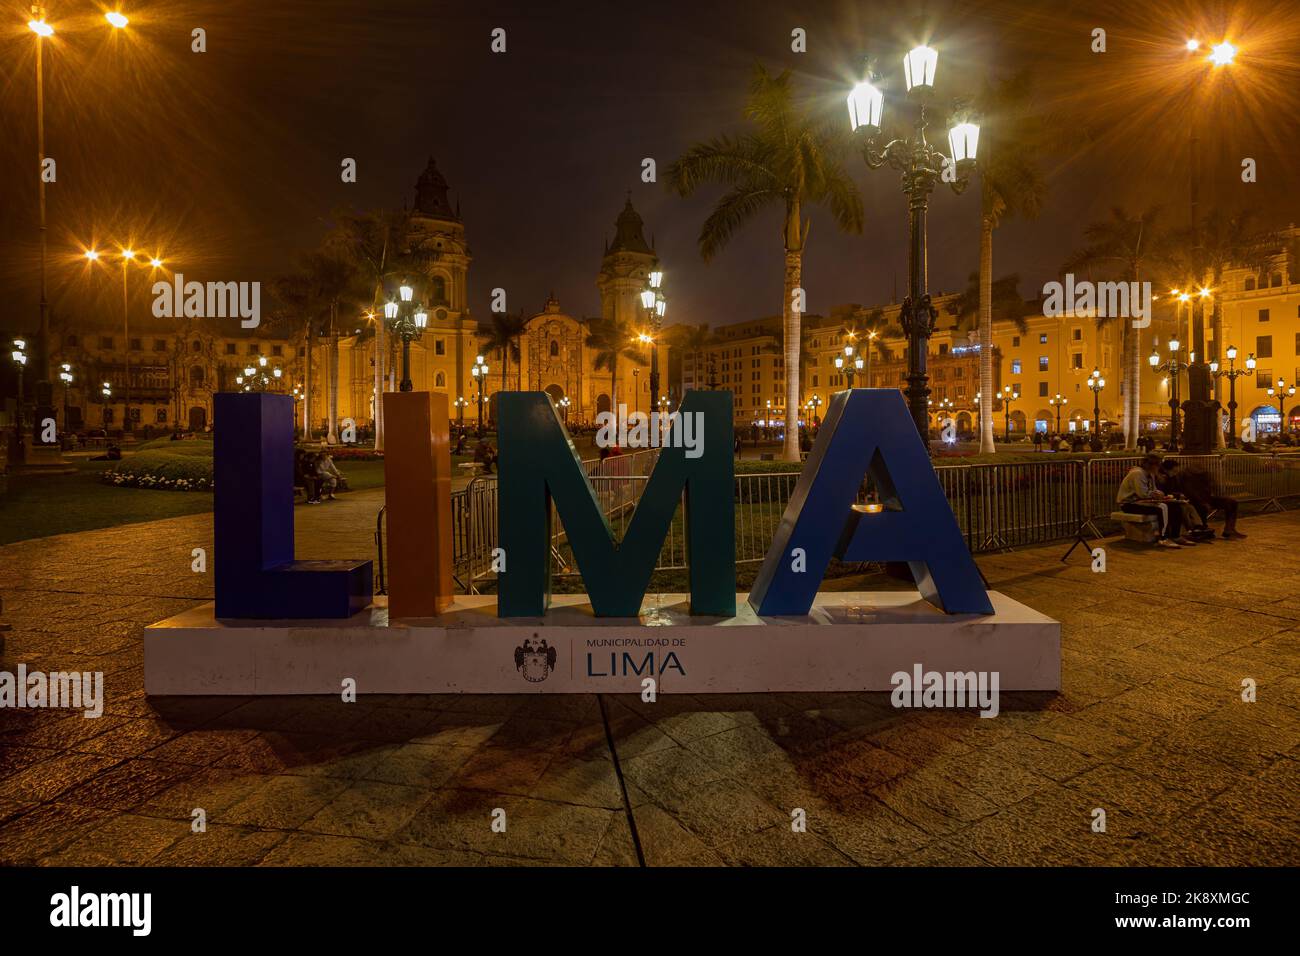 Lima, Peru - September 10, 2022: Lima lettering at Plaza De Amaz in Lima at night. Stock Photo